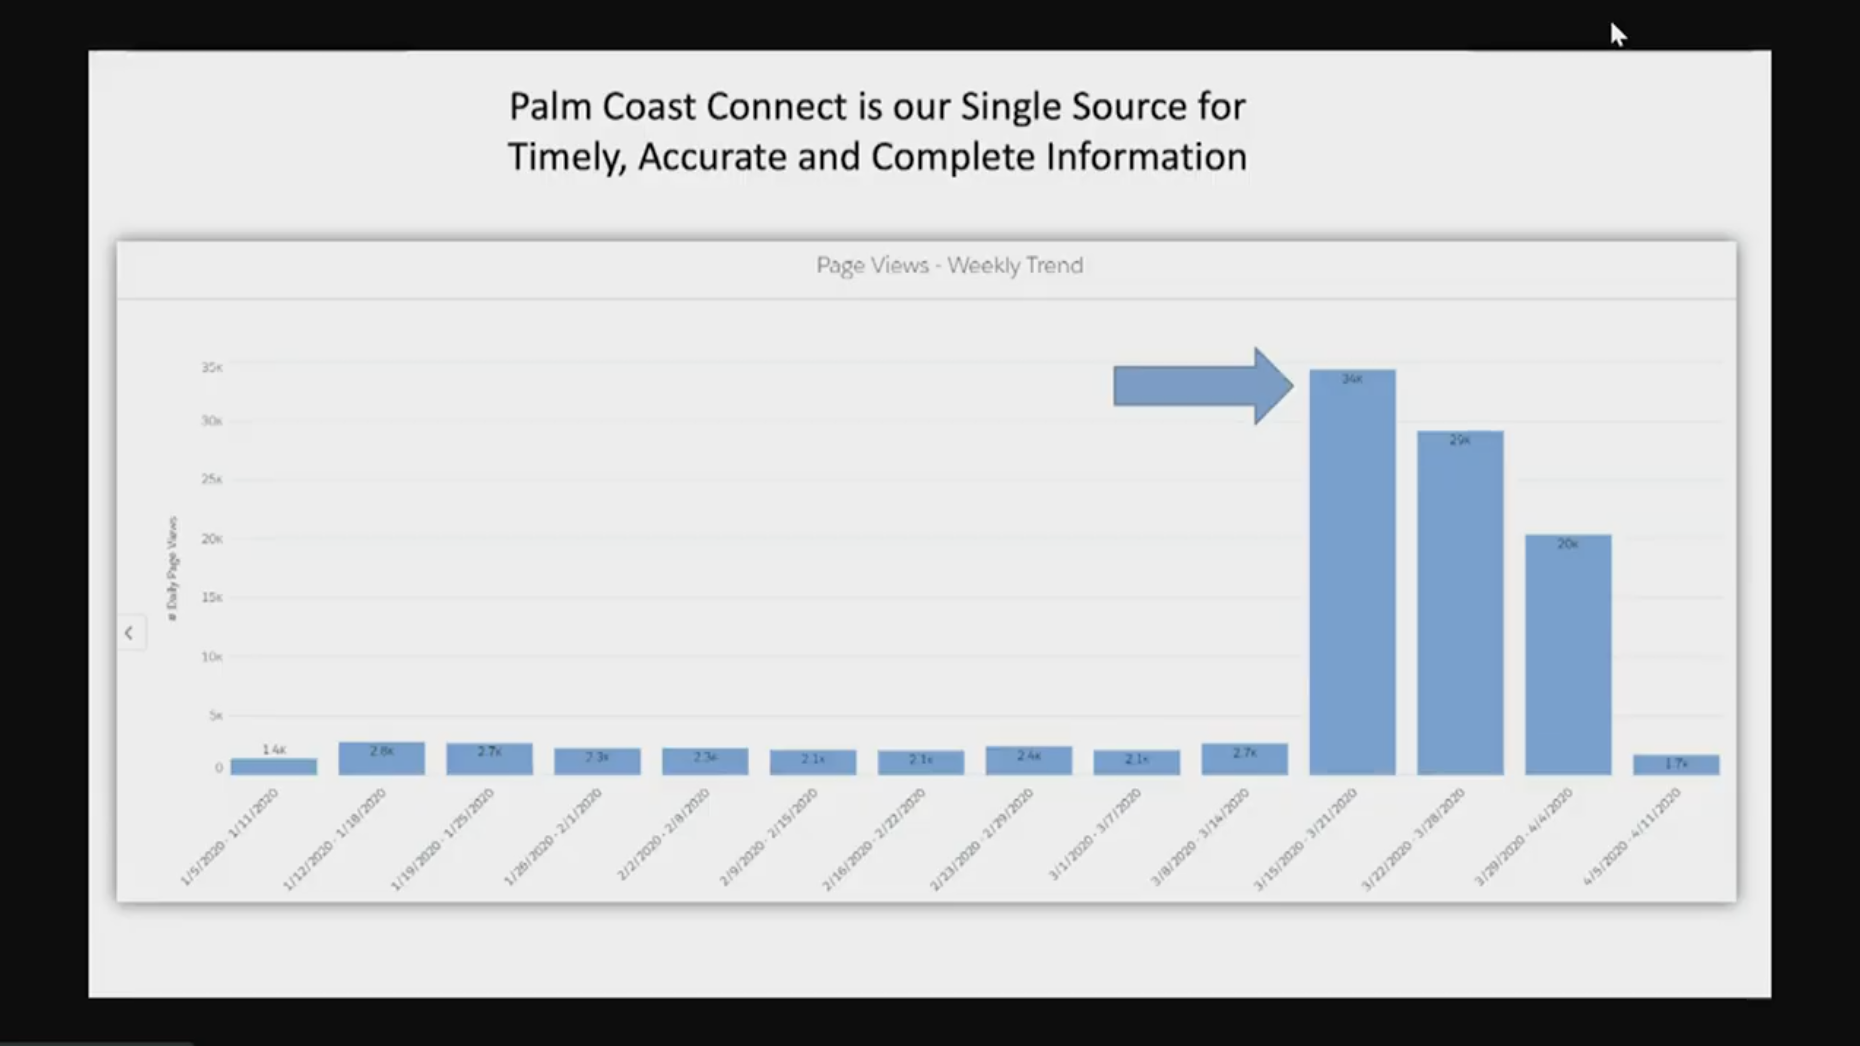 Views of the Palm Coast Connect website surged as the COVID-19 pandemic reached the U.S. Image from Palm Coast city government presentation